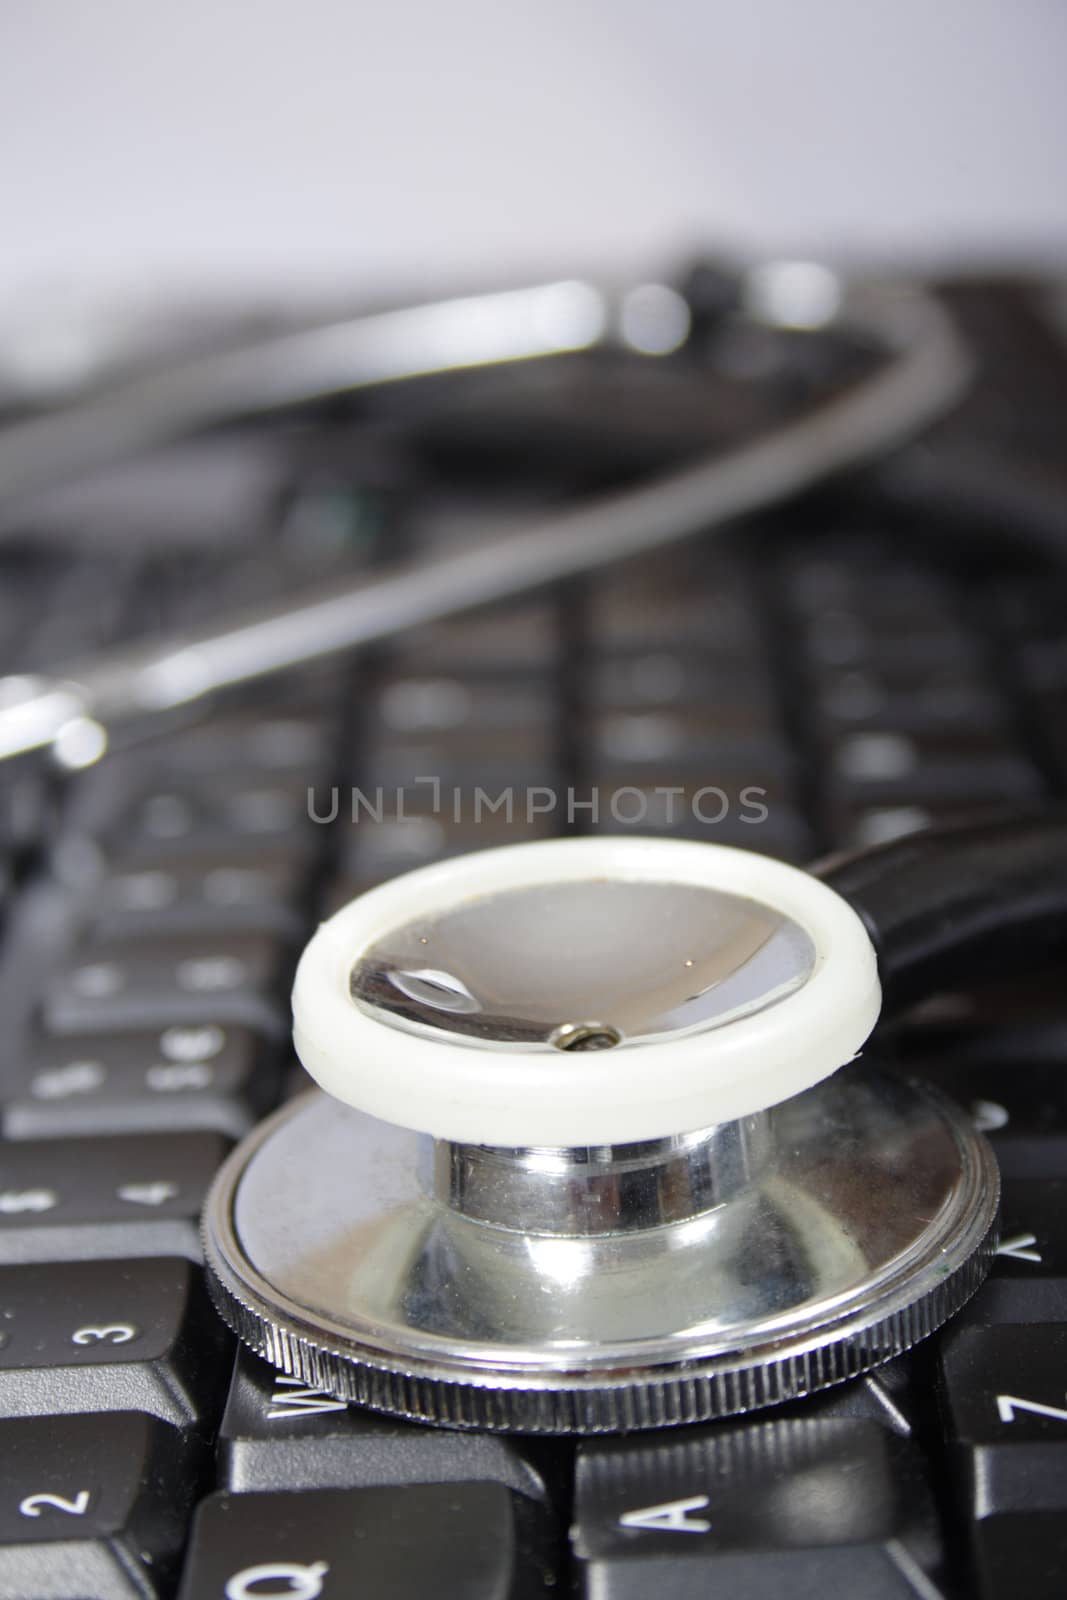 stethoscope on black keyboard of the computer